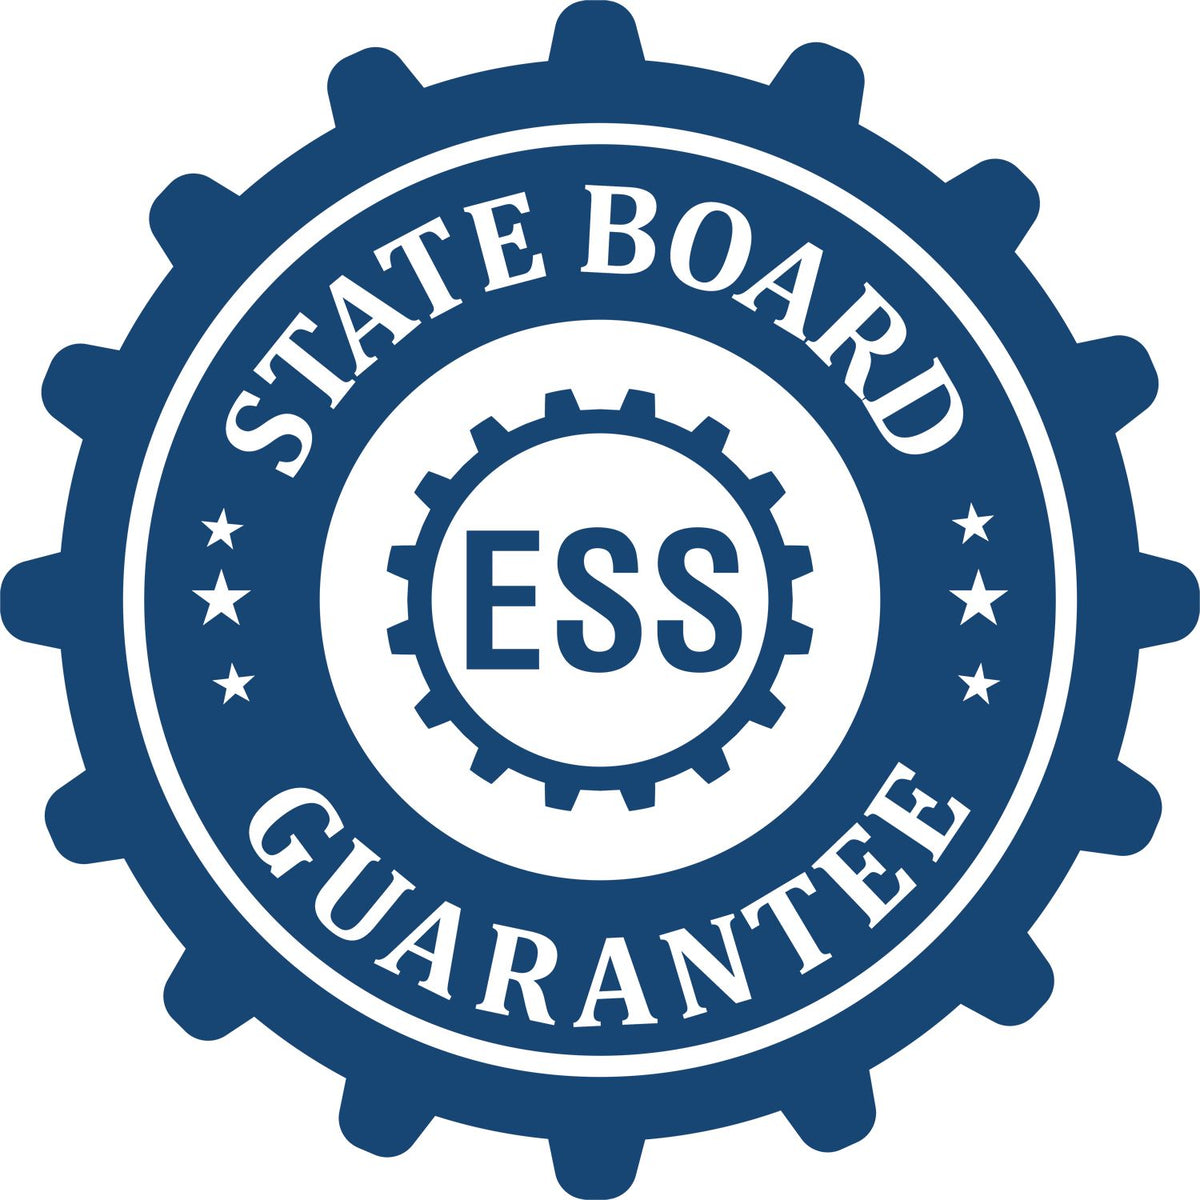 An emblem in a gear shape illustrating a state board guarantee for the Louisiana Desk Architect Embossing Seal product.